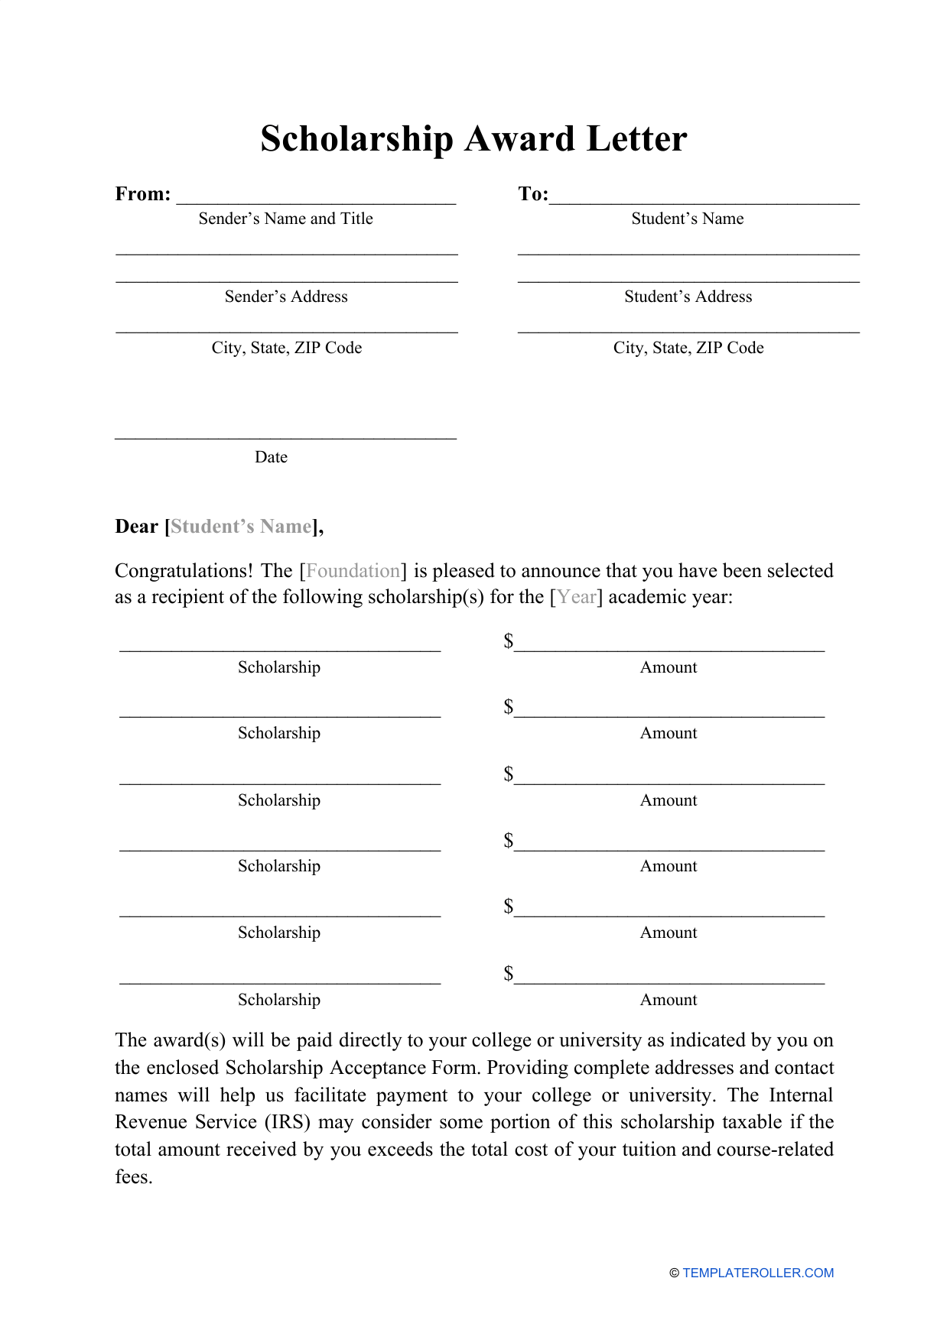 Scholarship Award Letter Template Download Printable PDF In Scholarship Award Letter Template